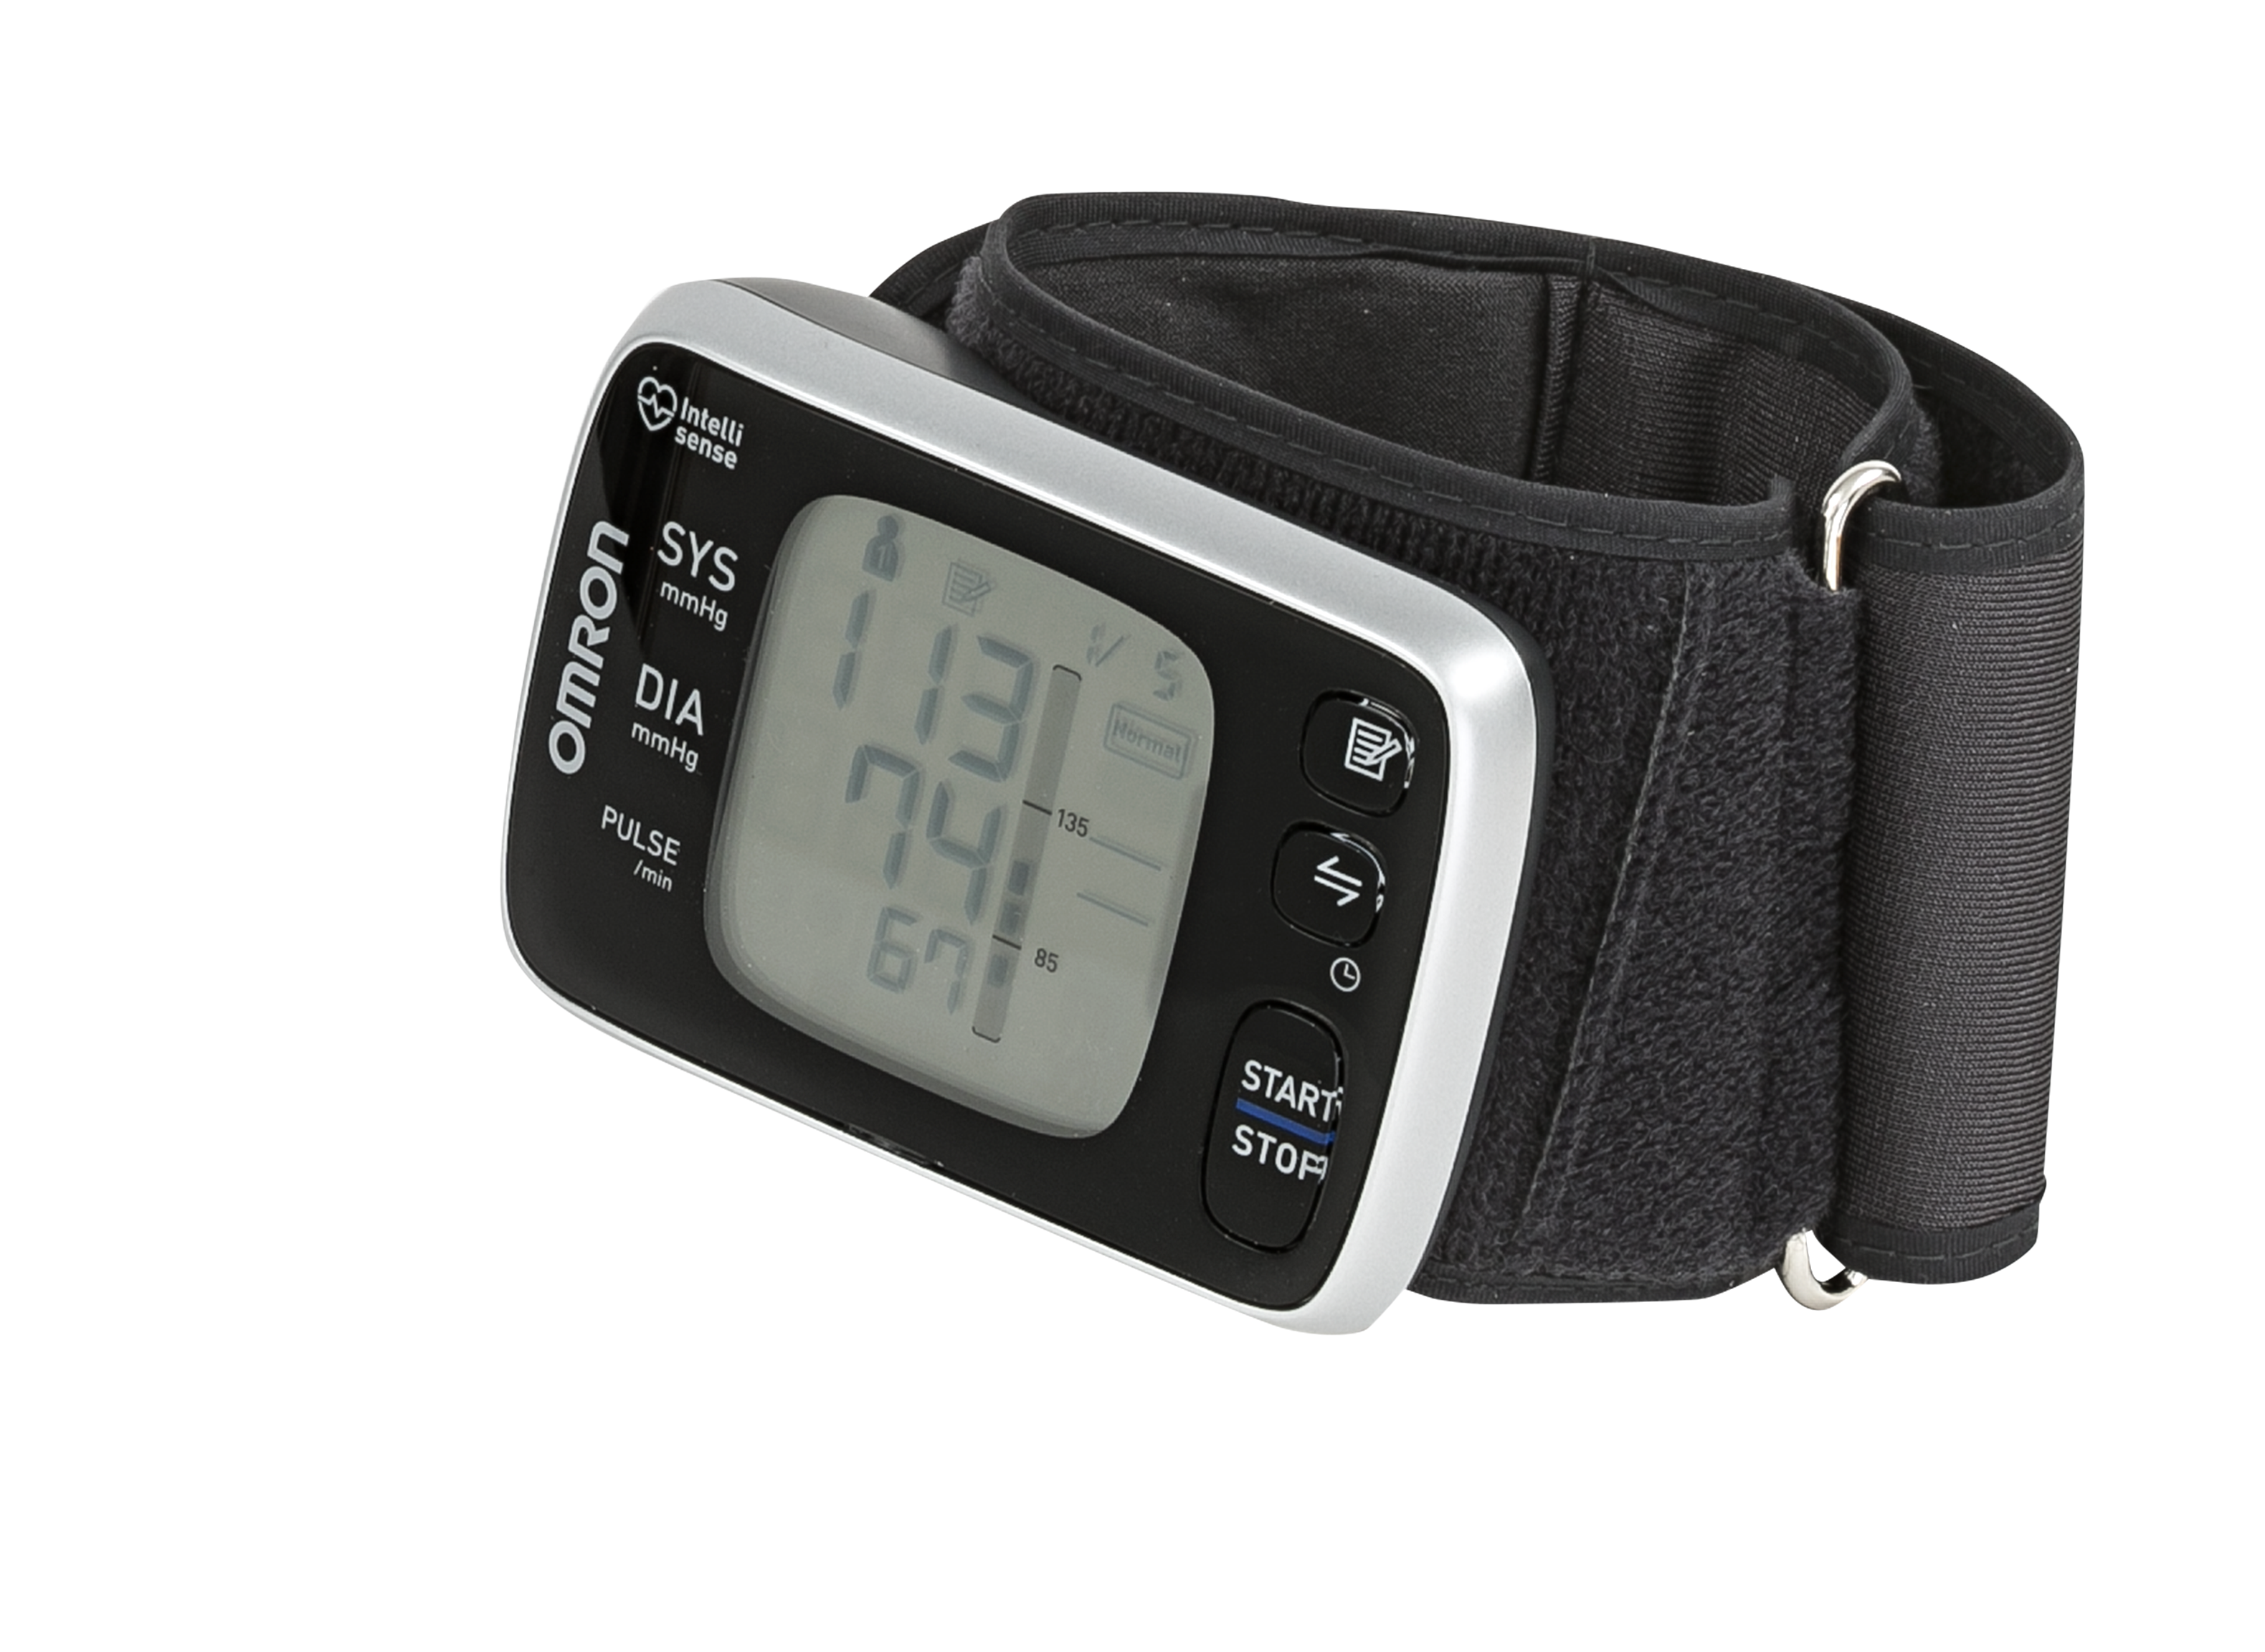 Omron 10 Series Blood Pressure Monitor Review & How To Use & Setup